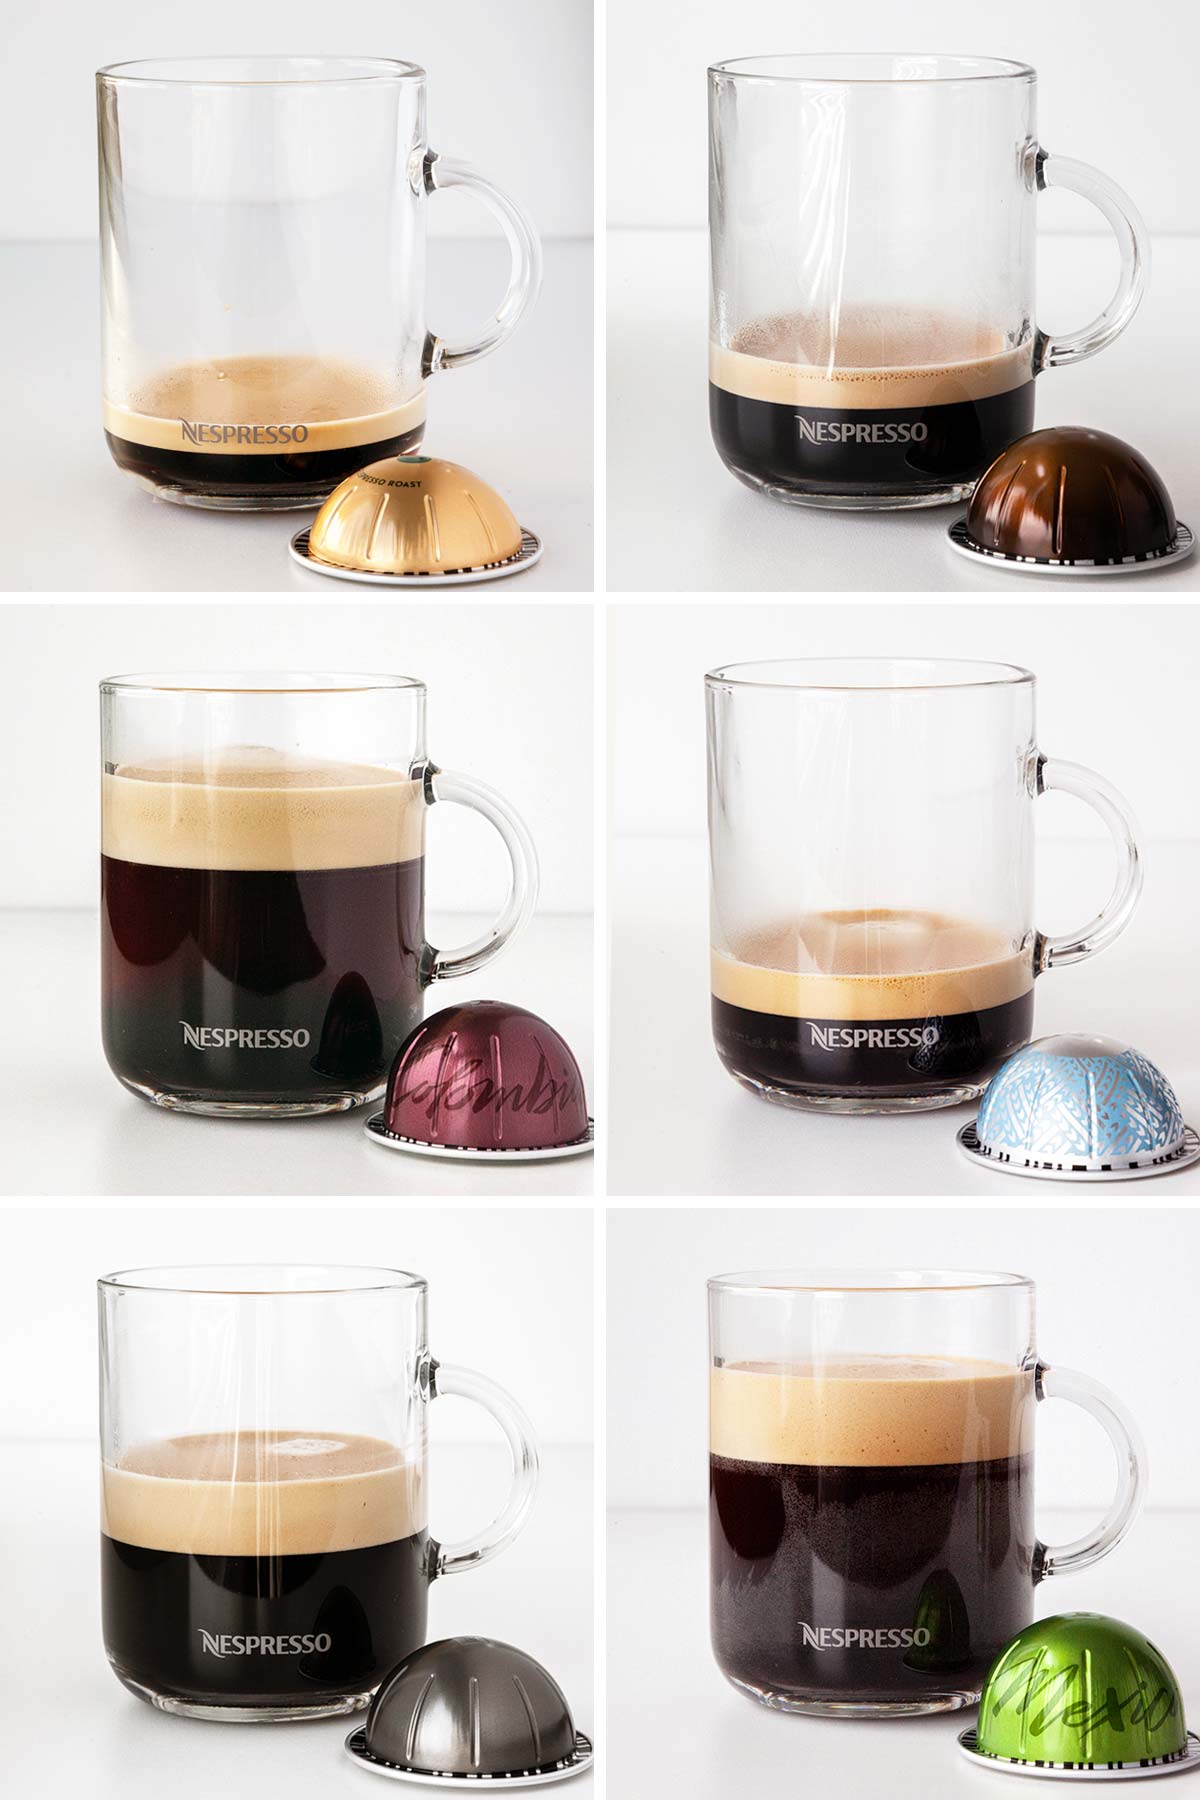 Nespresso mugs with different coffee in each one.